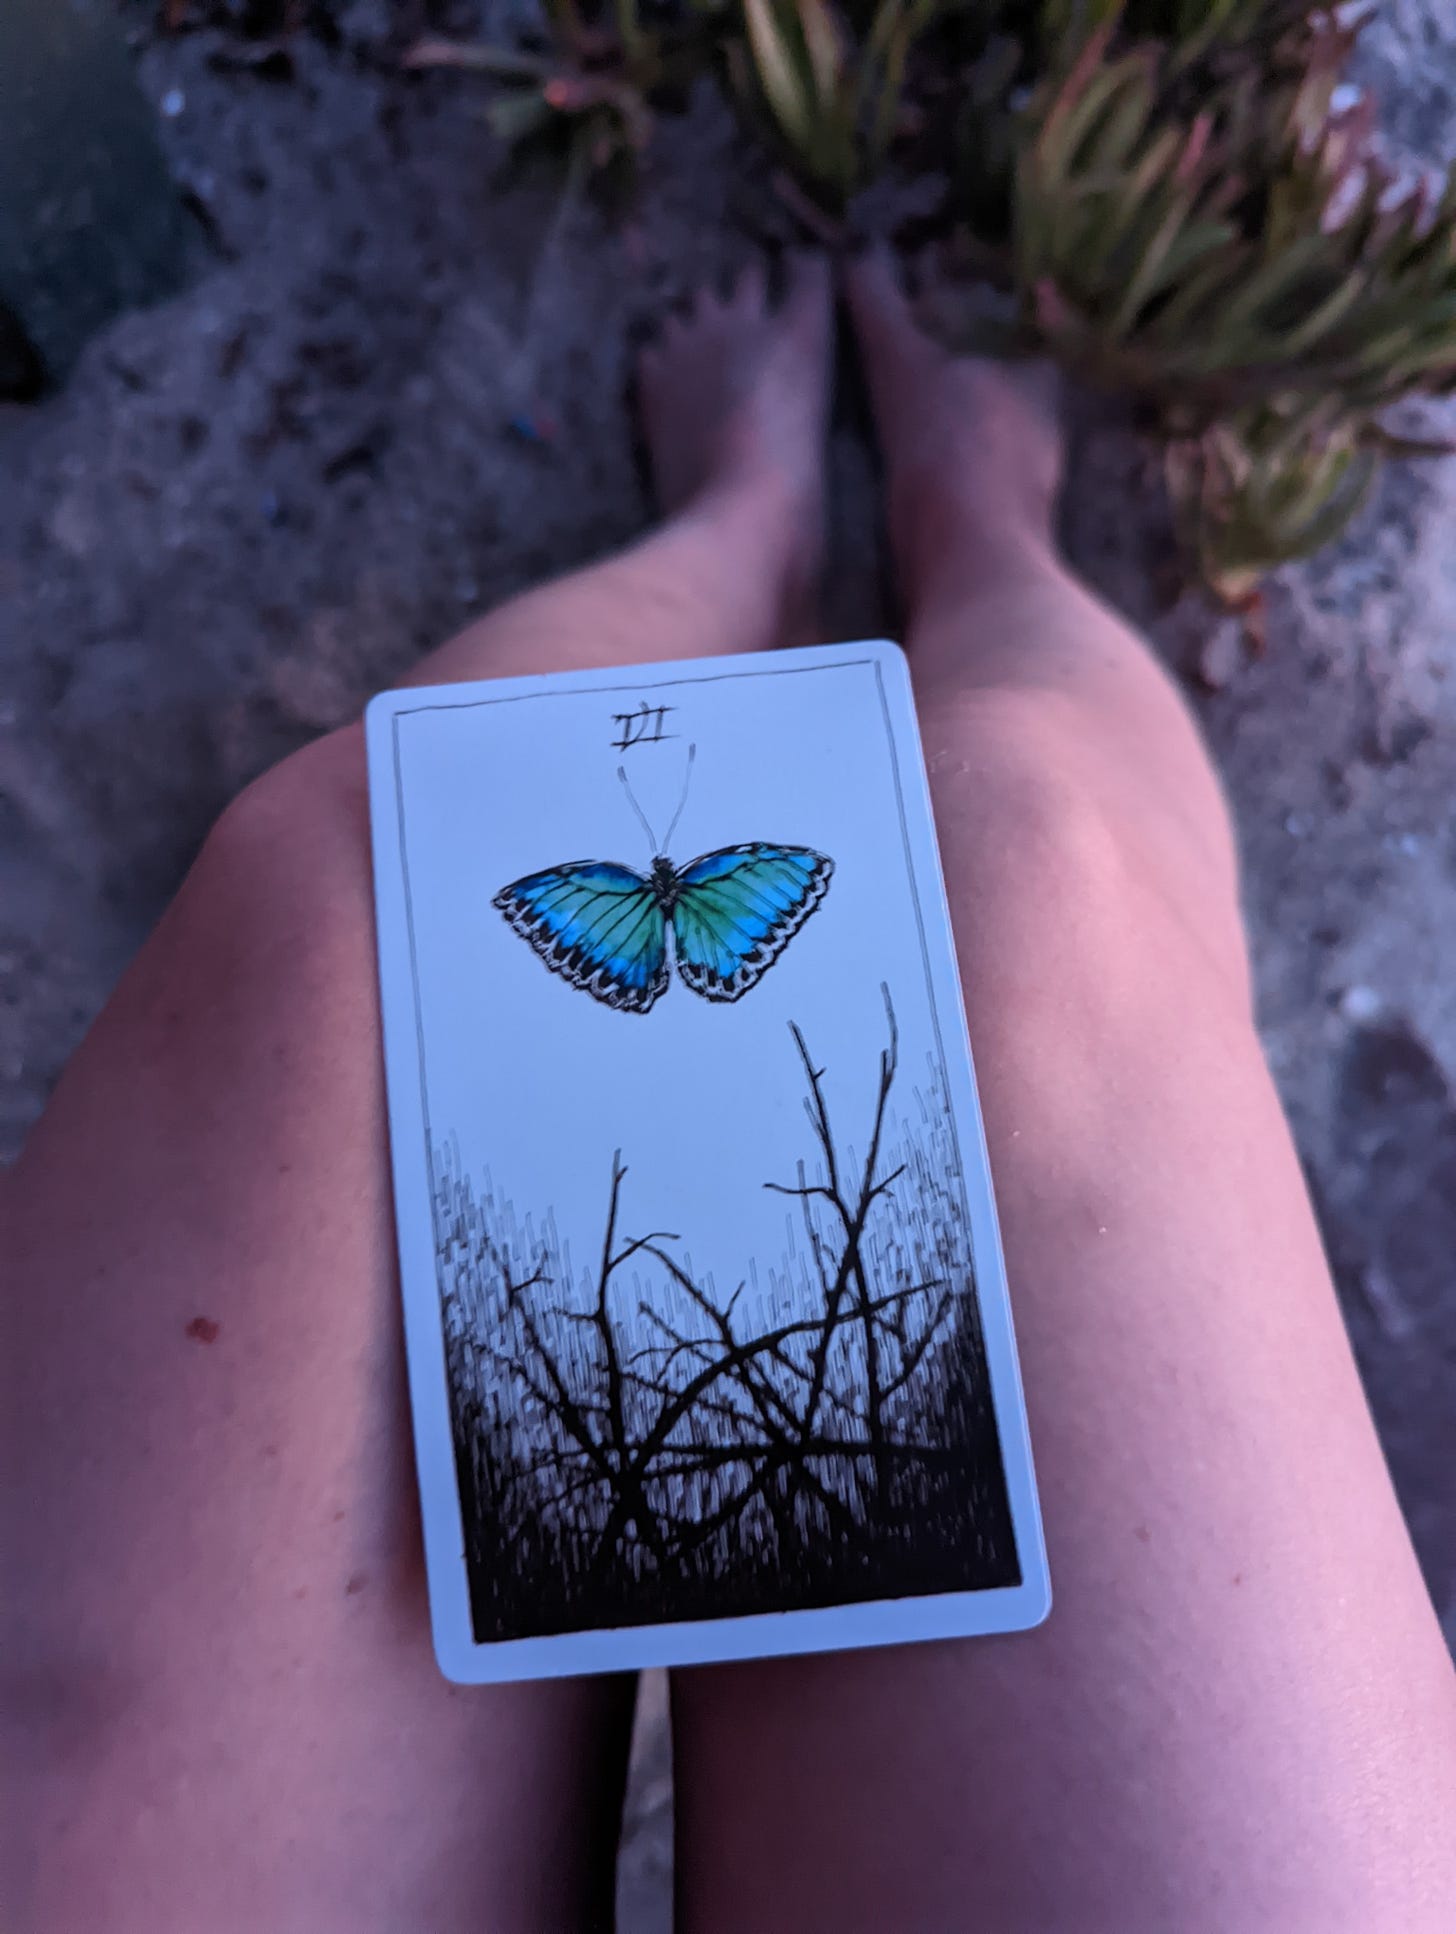 A tarot card from The Wild Unknown Tarot deck rests in the lap of a female figure, her bare legs stretched out into the sand on the beach. The card is the 6 of Wands, and features a blue and black butterfly at the top, with 6 dark sticks piled on top of each other at the bottom of the card.